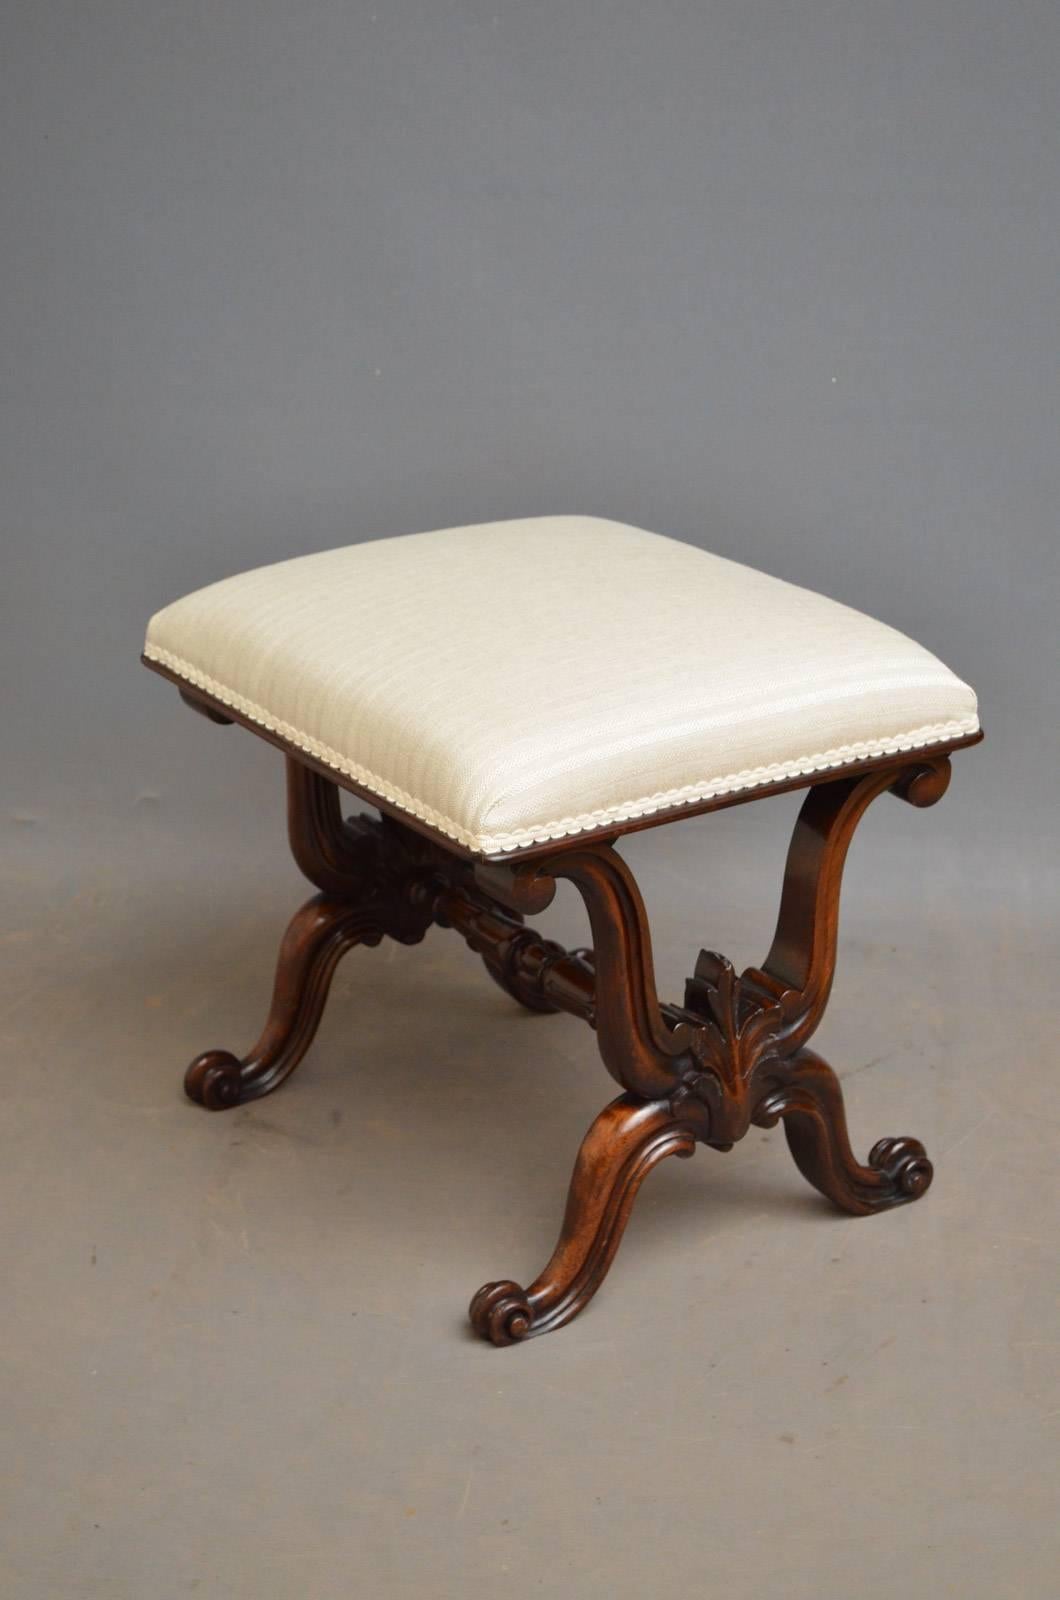 Sn4363, fine quality William IV, rosewood, X-frame stool with newly upholstered seat with contemporary cover and finely carved scroll legs united by turned and lotus carved stretcher. This antique stool retains its original color, finish and patina,